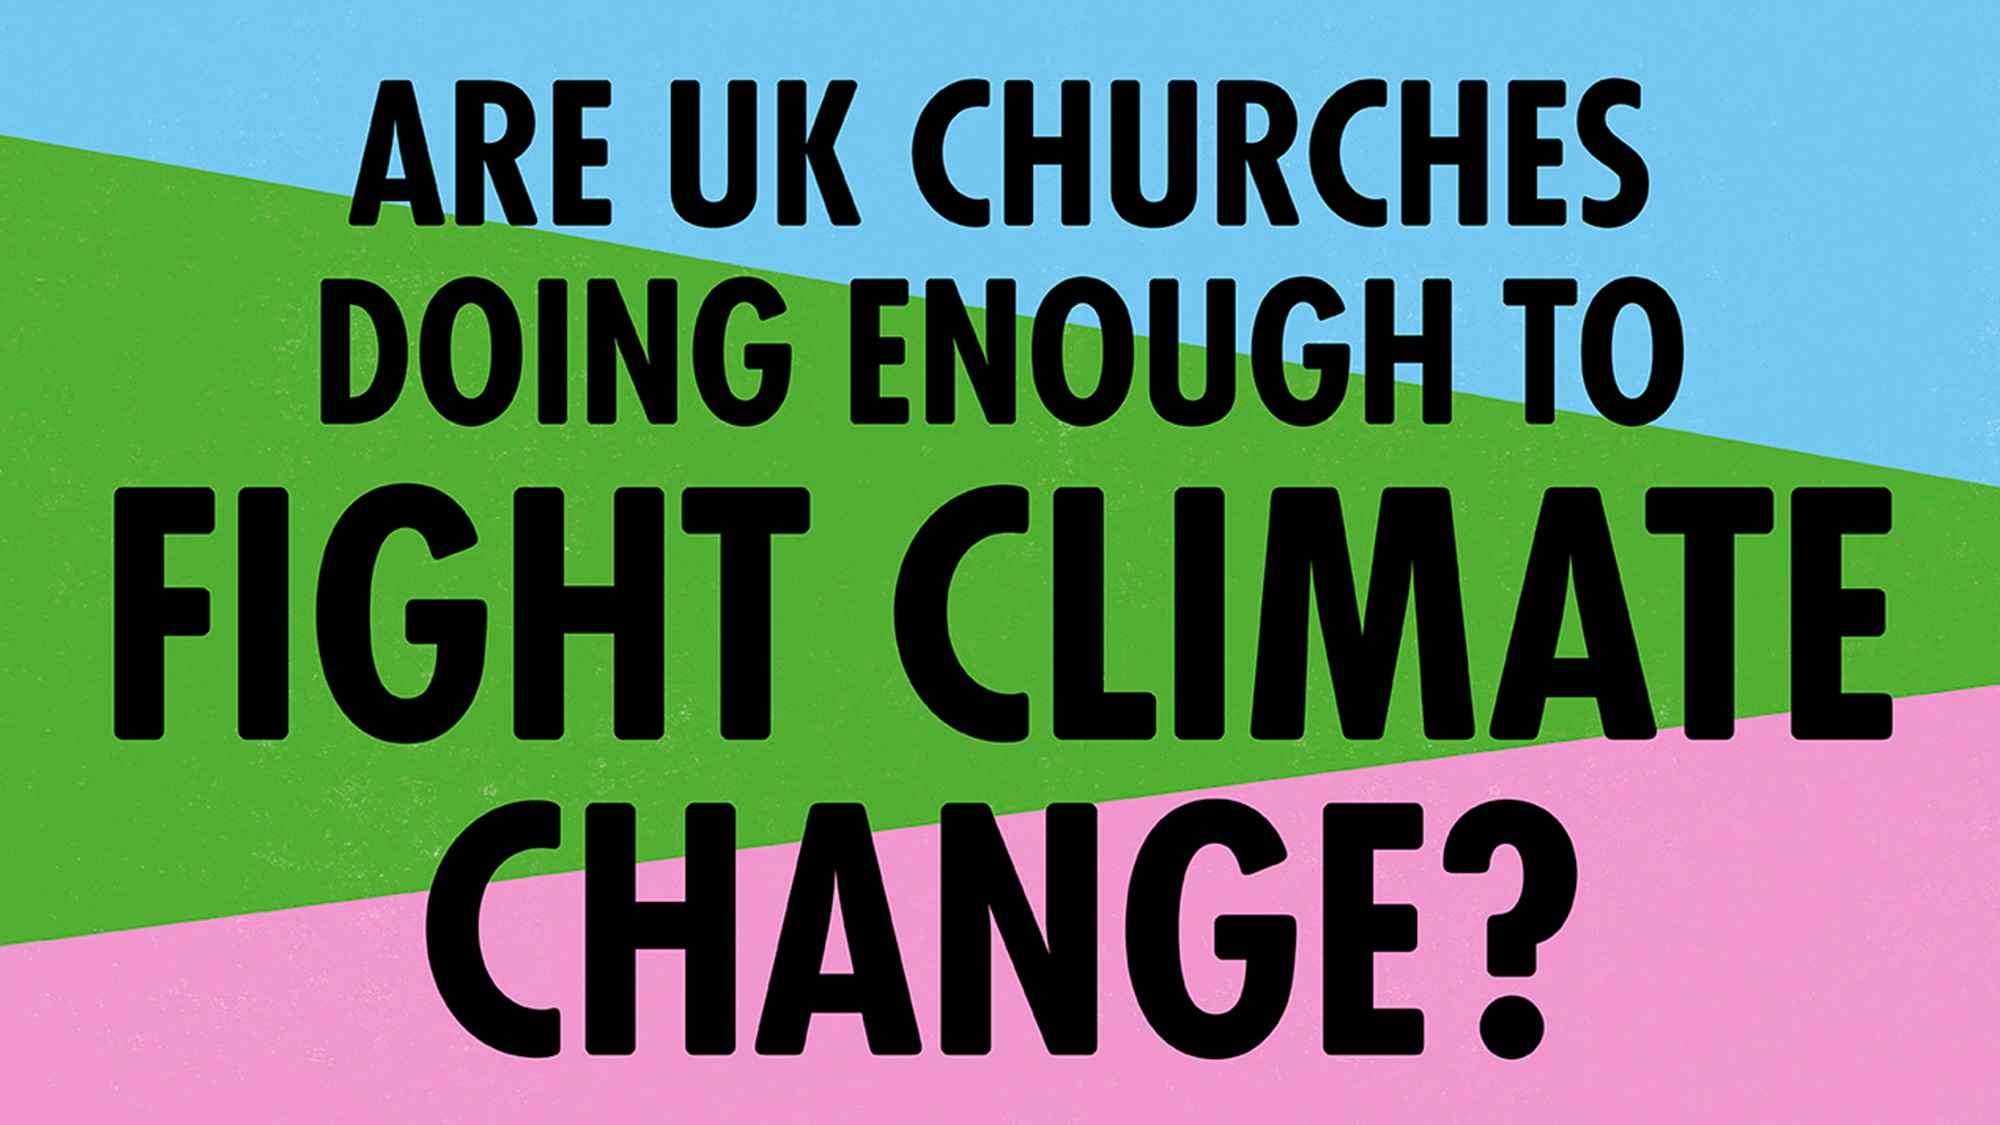 Are UK churches doing enough to fight climate change?